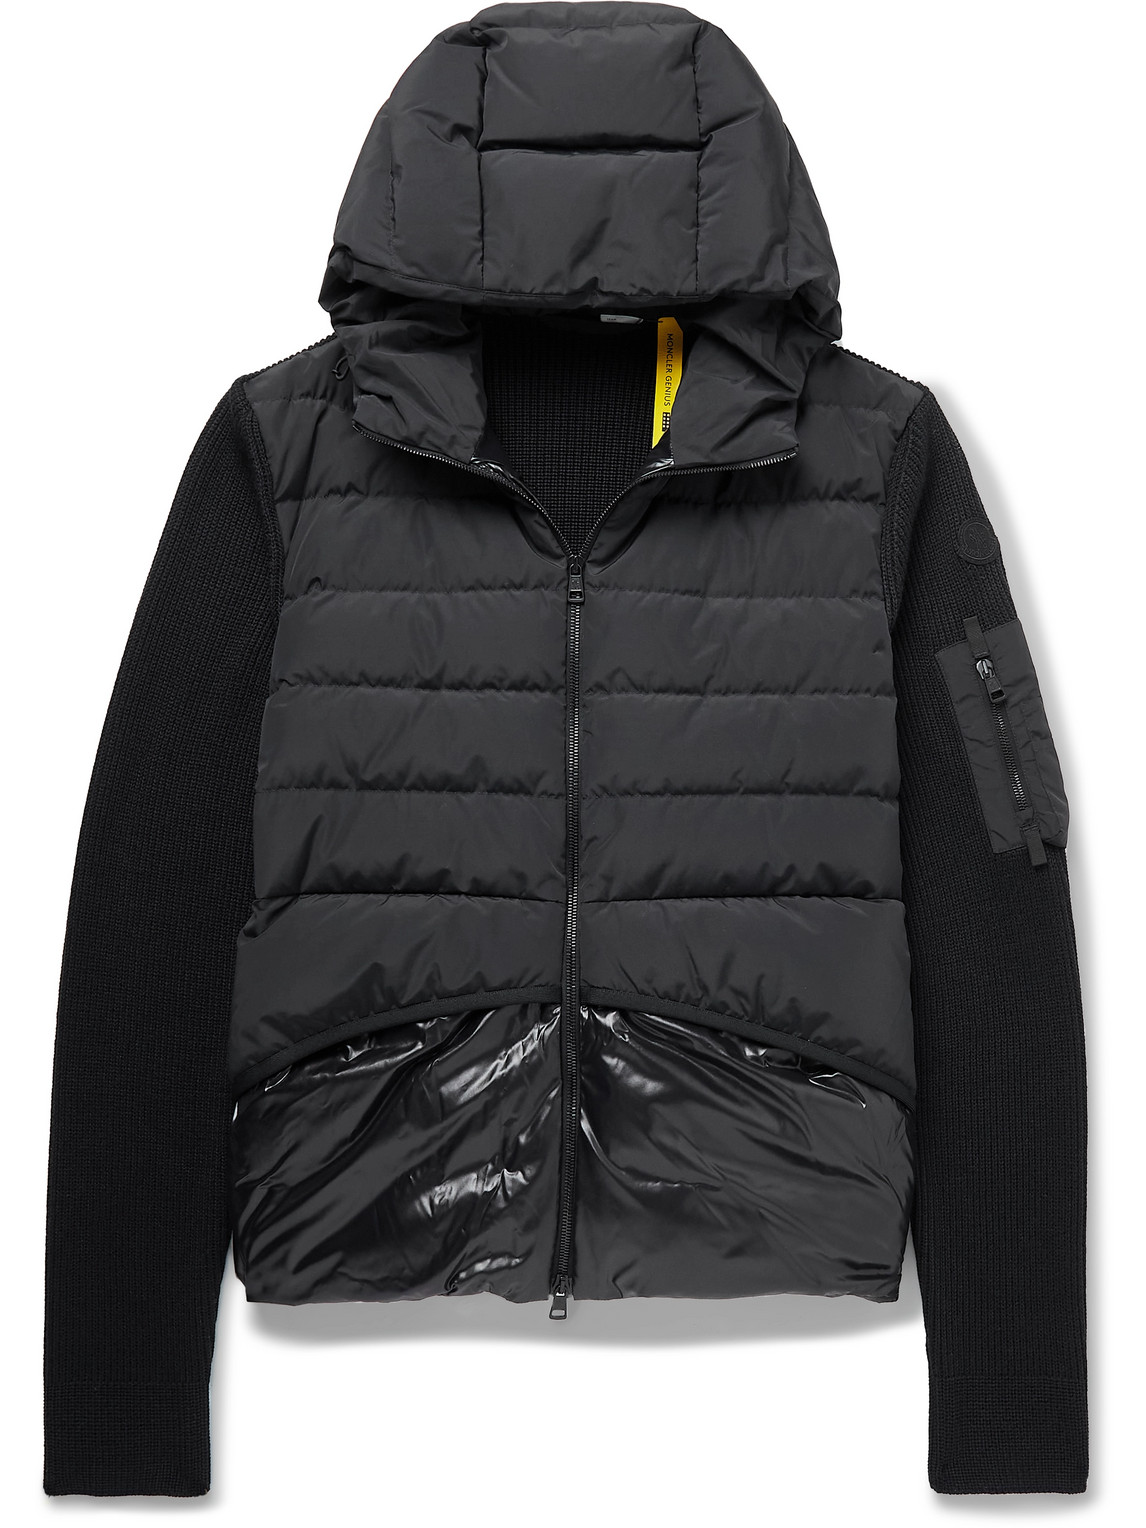 Moncler Genius 2 Moncler 1952 Ribbed Wool and Quilted Shell Down Hooded Jacket